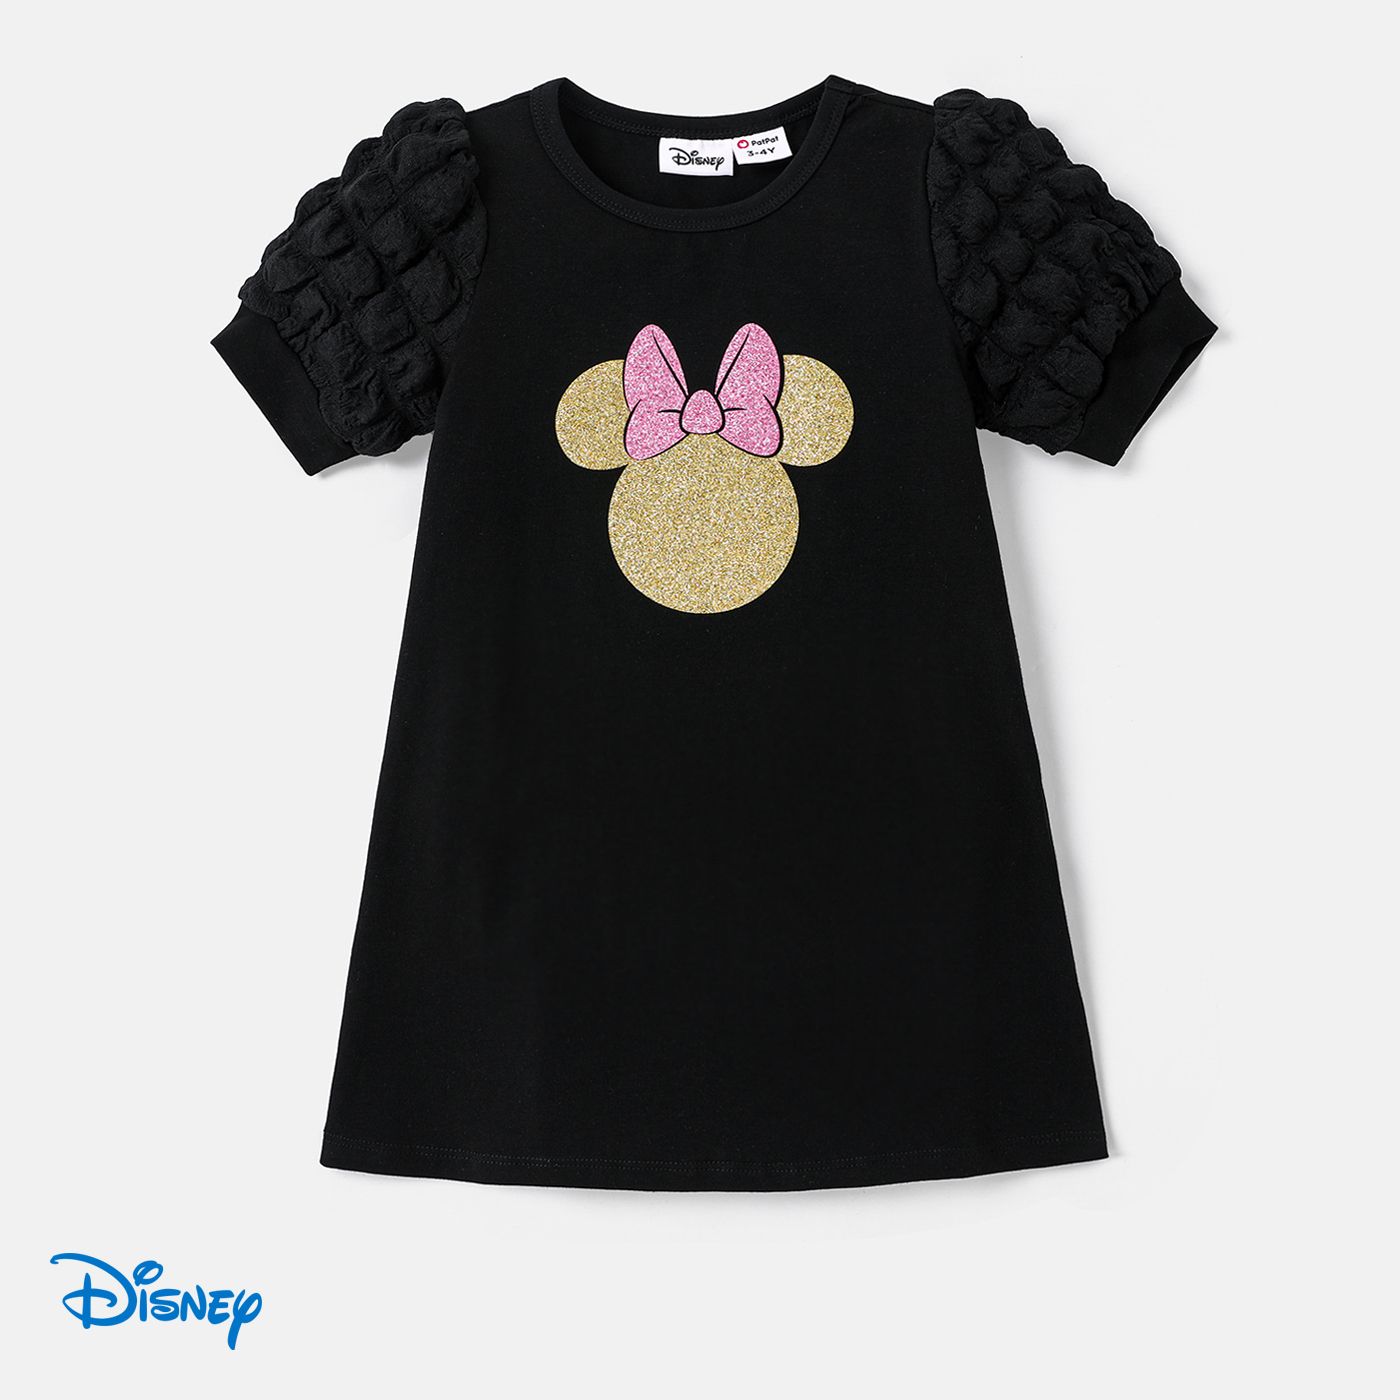 Disney Mickey And Friends Family Matching Black Cotton Short-sleeve Graphic Dress Or Tee